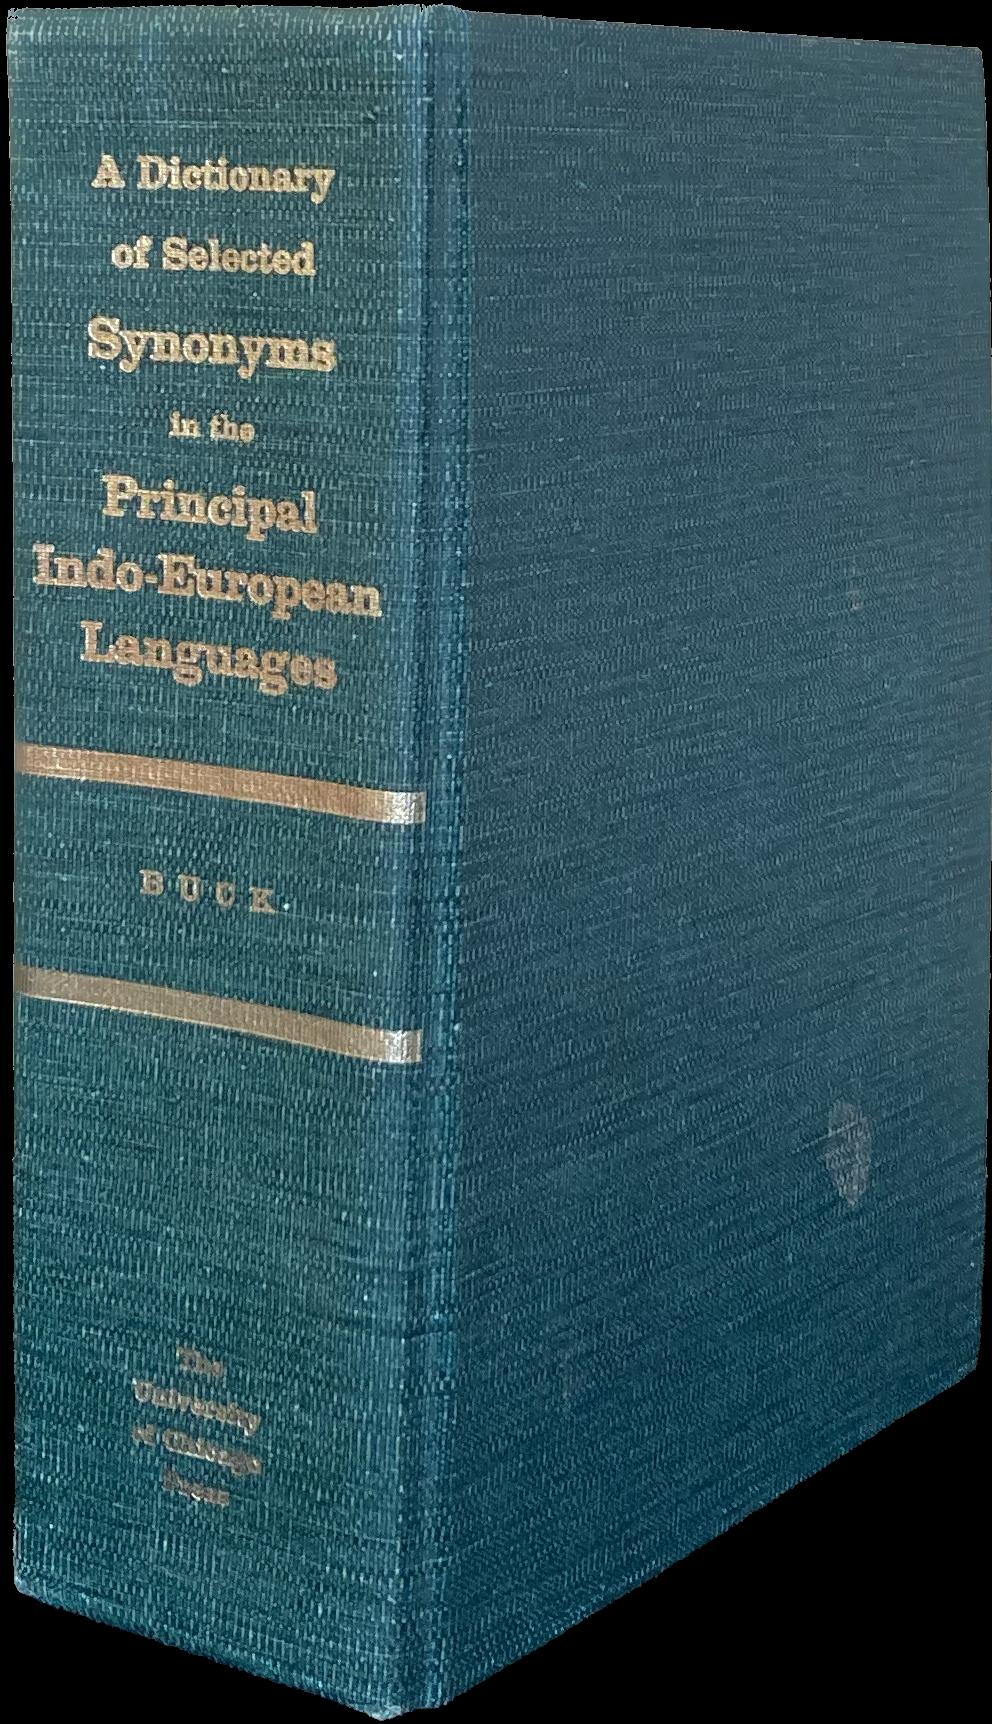 A Dictionary of Selected Synonyms in the Principal Indo-European Languages: A Contribution to the History of Ideas - Carl Darling Buck